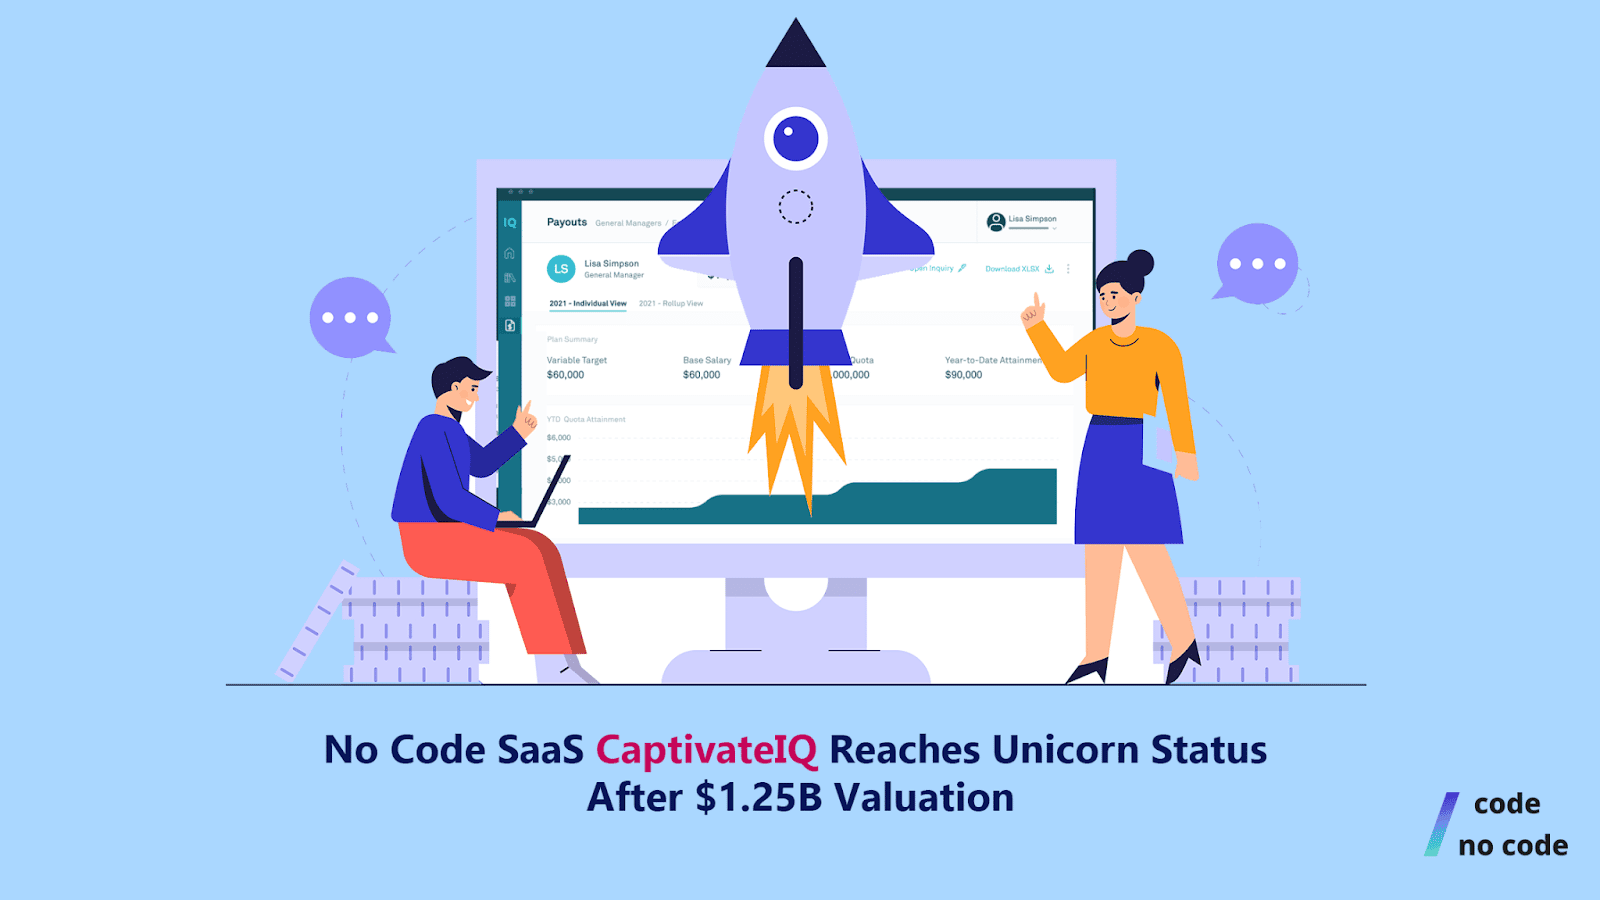 two people looking at a computer screen and a spaceship launching out of it, with the text "No Code saas captivateiq reaches unicorn status after .25B valuation"